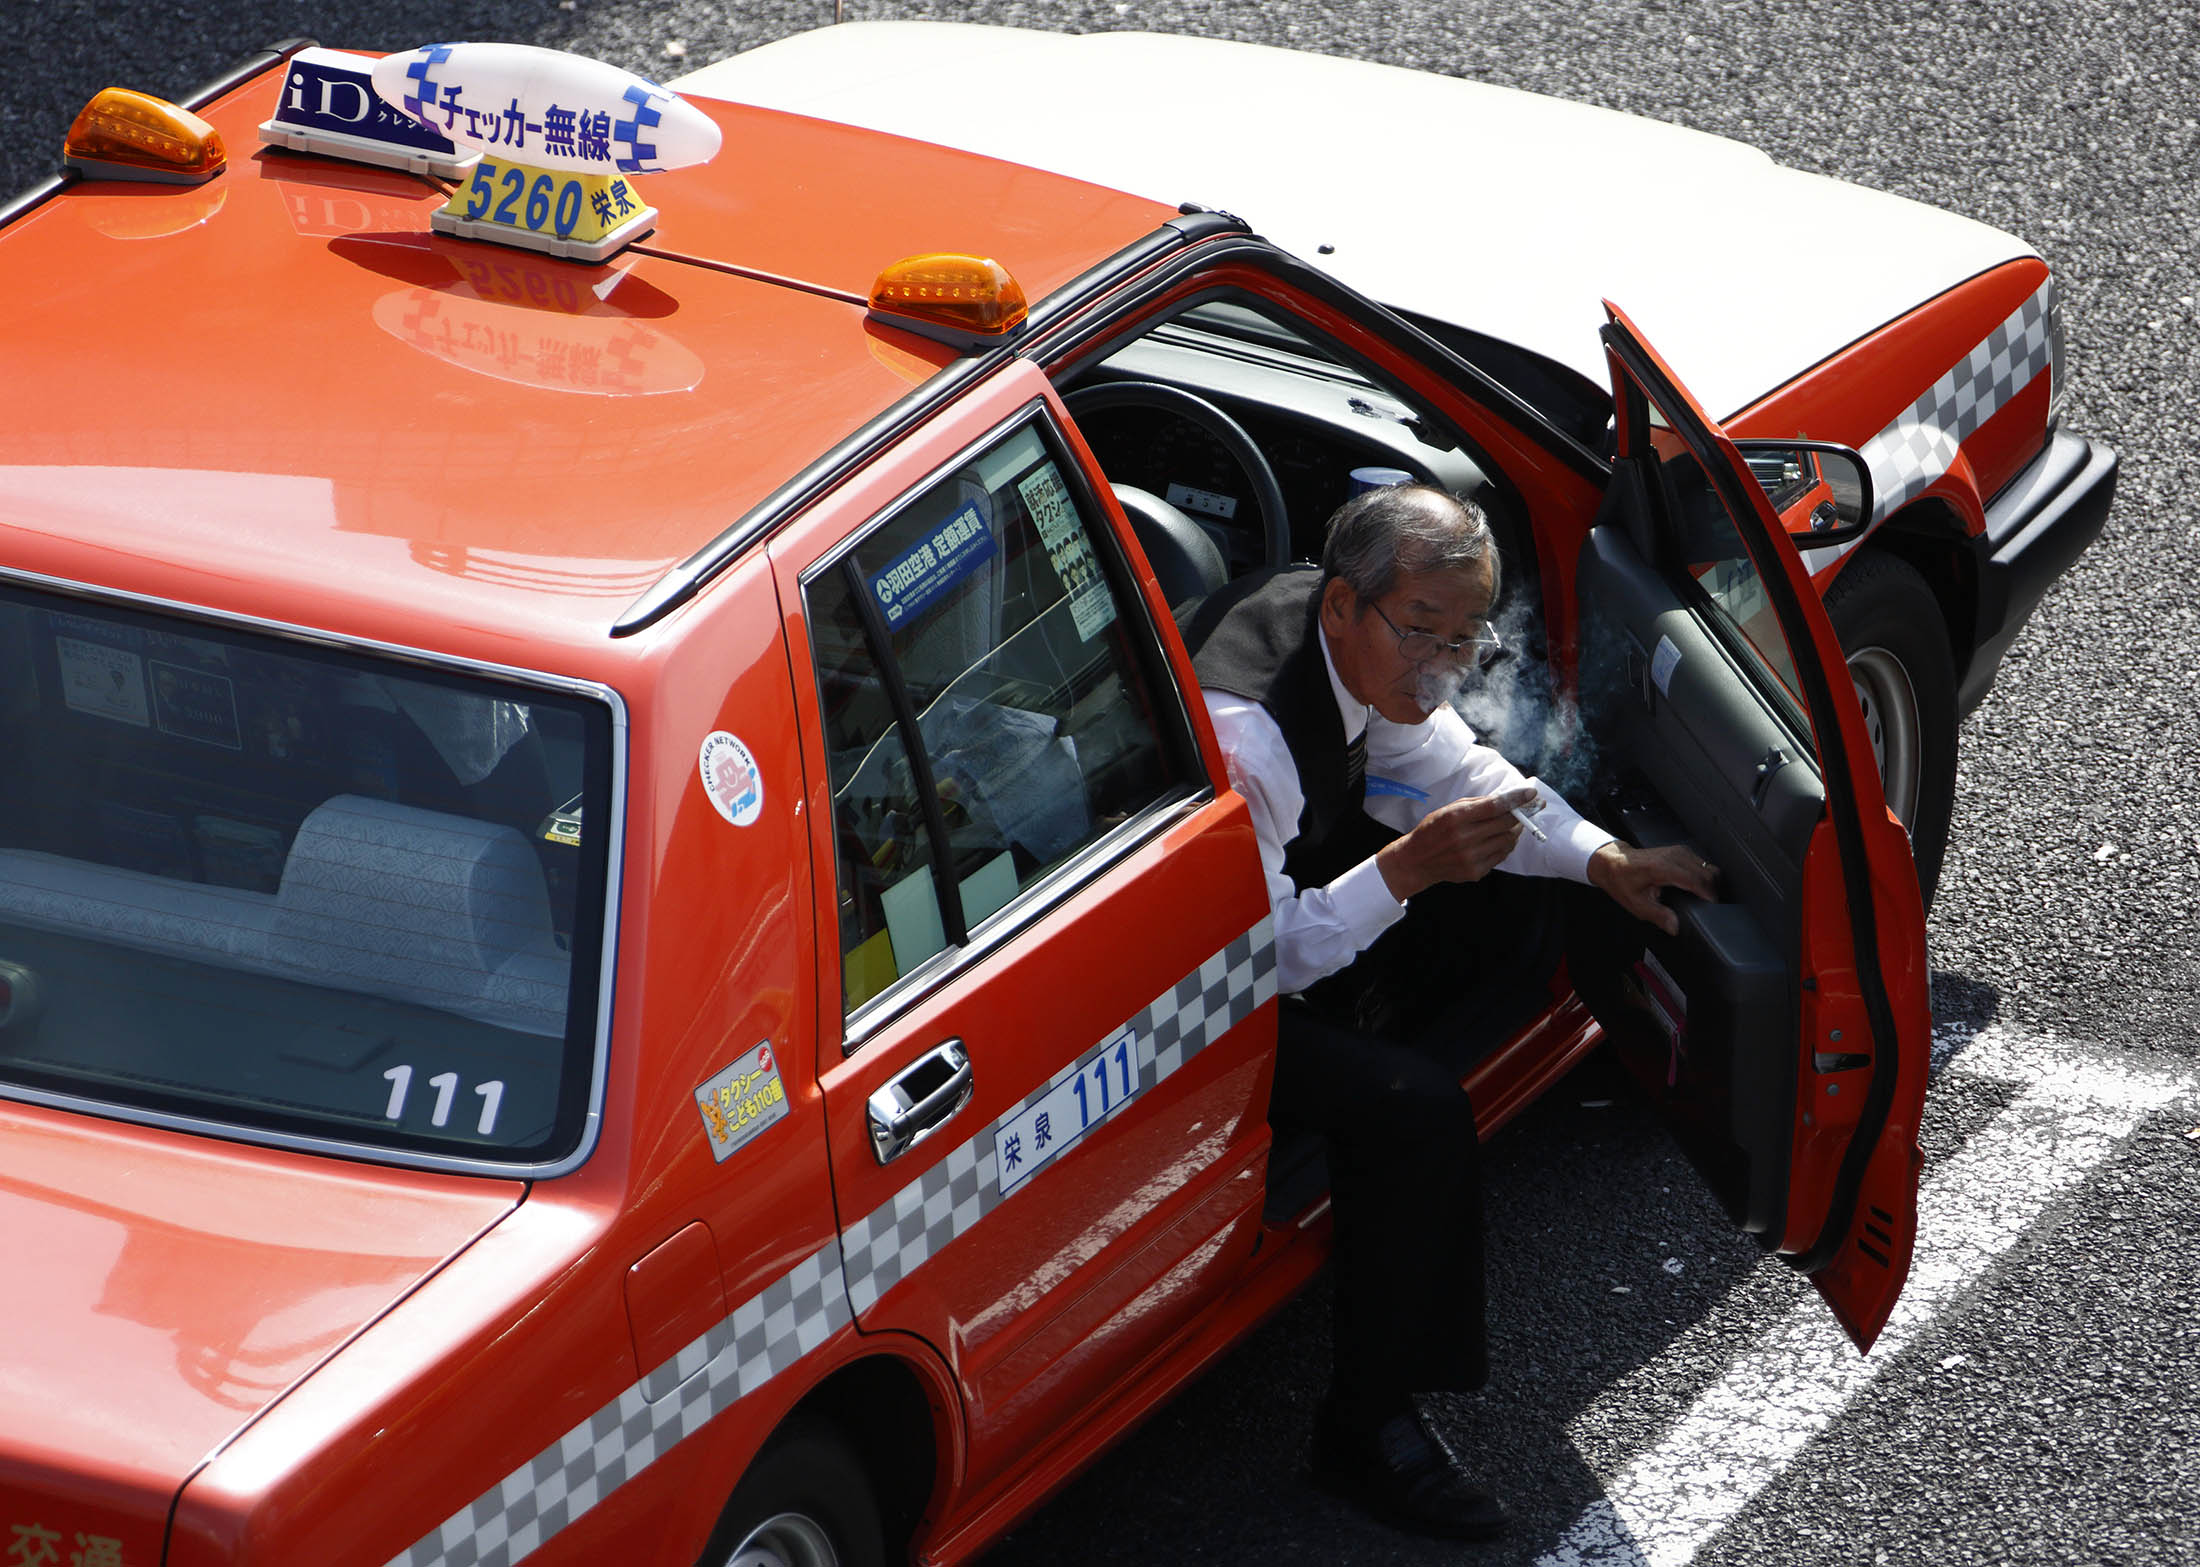 A taxi driver smokes as he exits a taxi outside a train station in Tokyo, Japan, on Wednesday, Sept. 23, 2015. Tokyo's taxi companies will shift as much as 30 percent of their fleets to an LPG-powered hybrid from Toyota Motor Corp. by 2020, raising the bar for the world’s biggest cities in their bids to reduce emissions from cabs.
